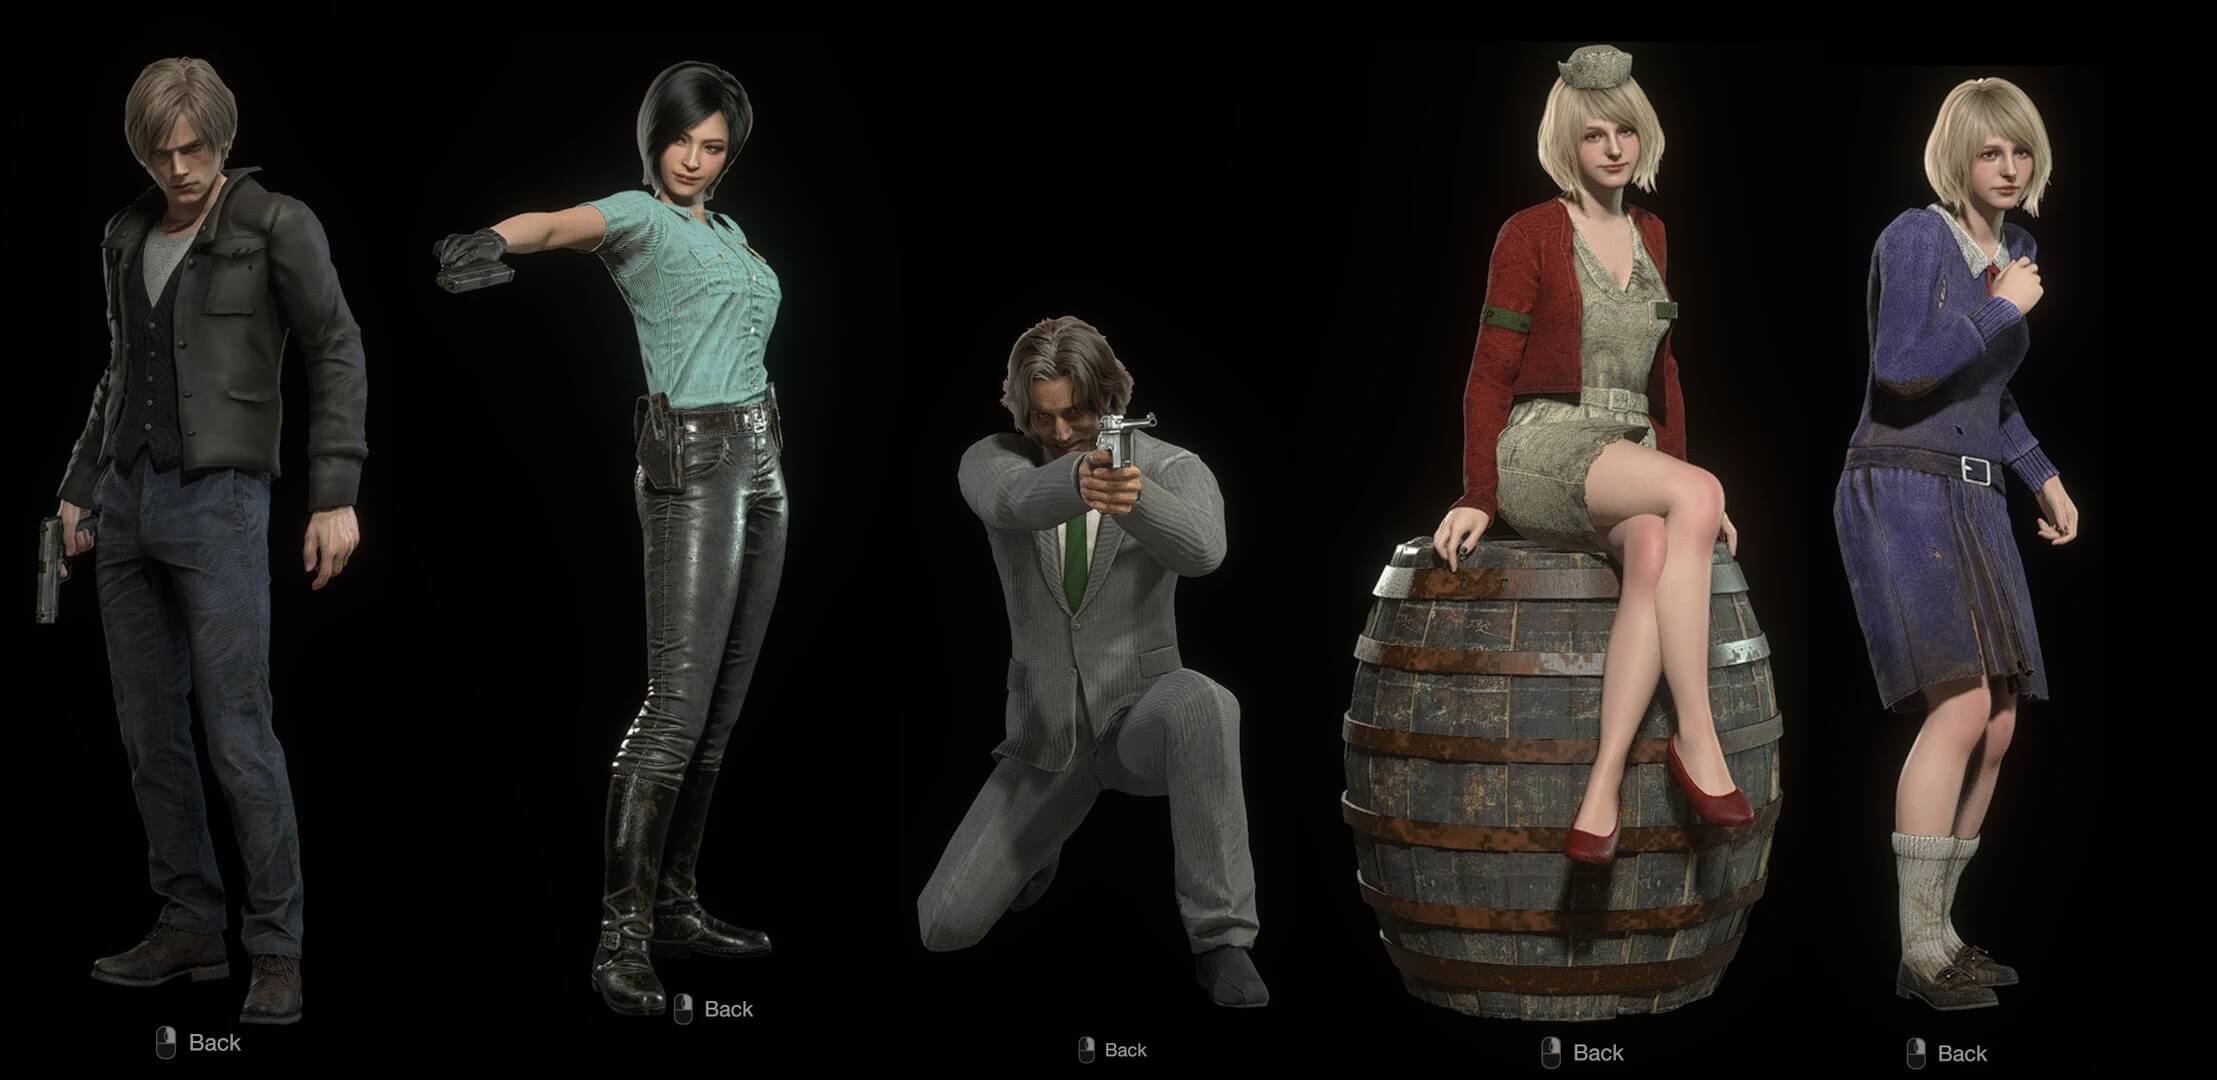 Resident Evil 4 Remake just got an amazing Silent Hill Outfit Mod